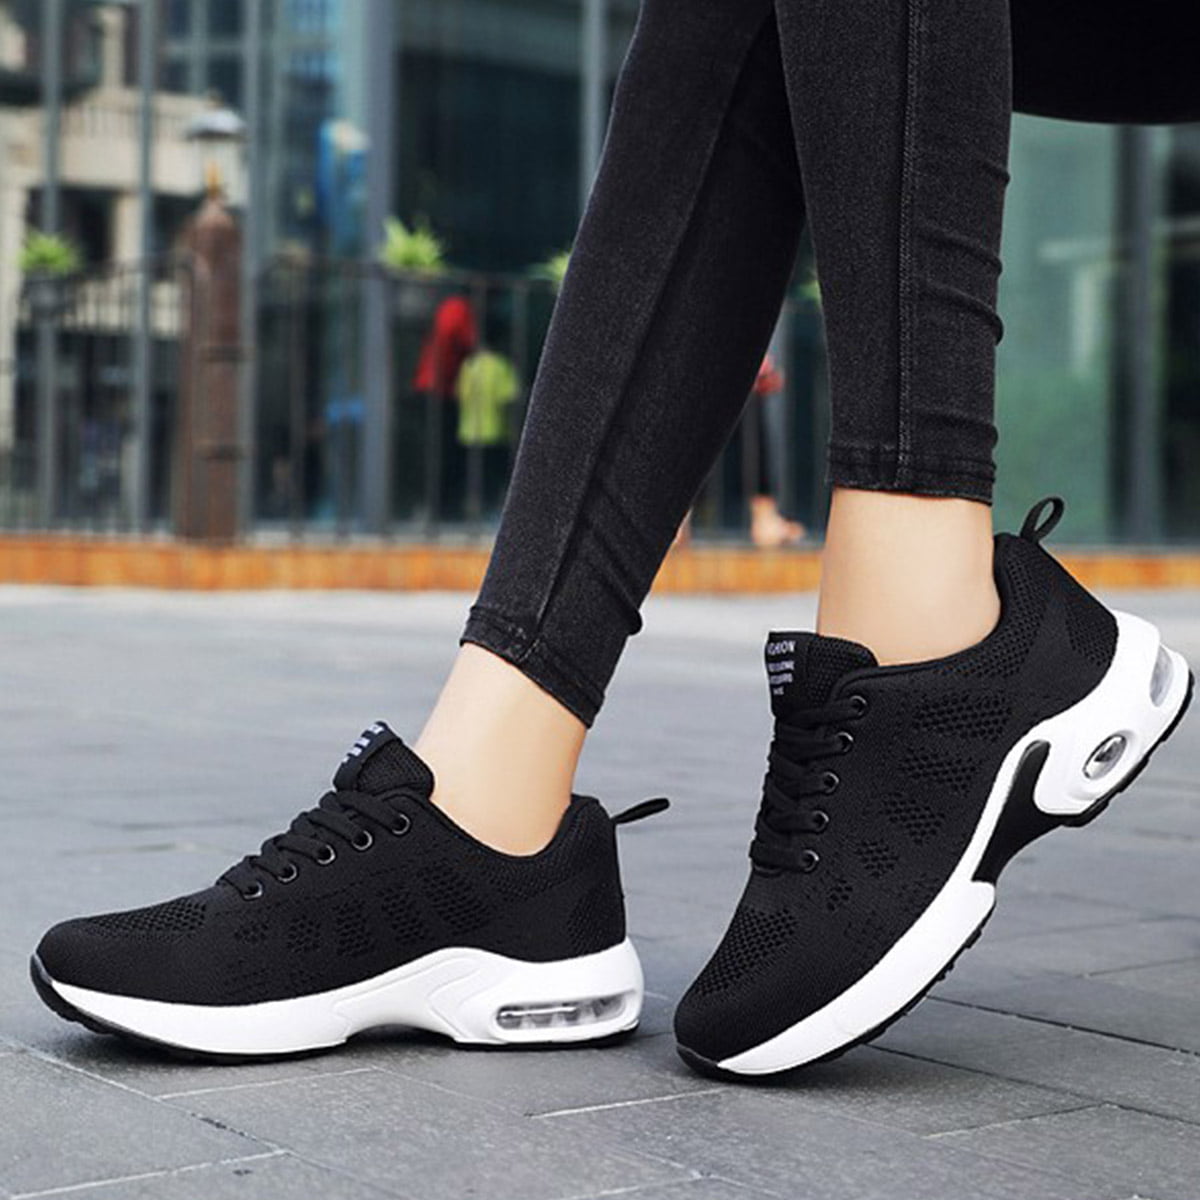 Arbejdsgiver Diplomati Ledig Shopslong Womens Running Shoes Breathable Lightweight Sneaker Damping Hiking  Walking Shoes Women for Athletic Gym Casual Travel - Black 8.5 - Walmart.com